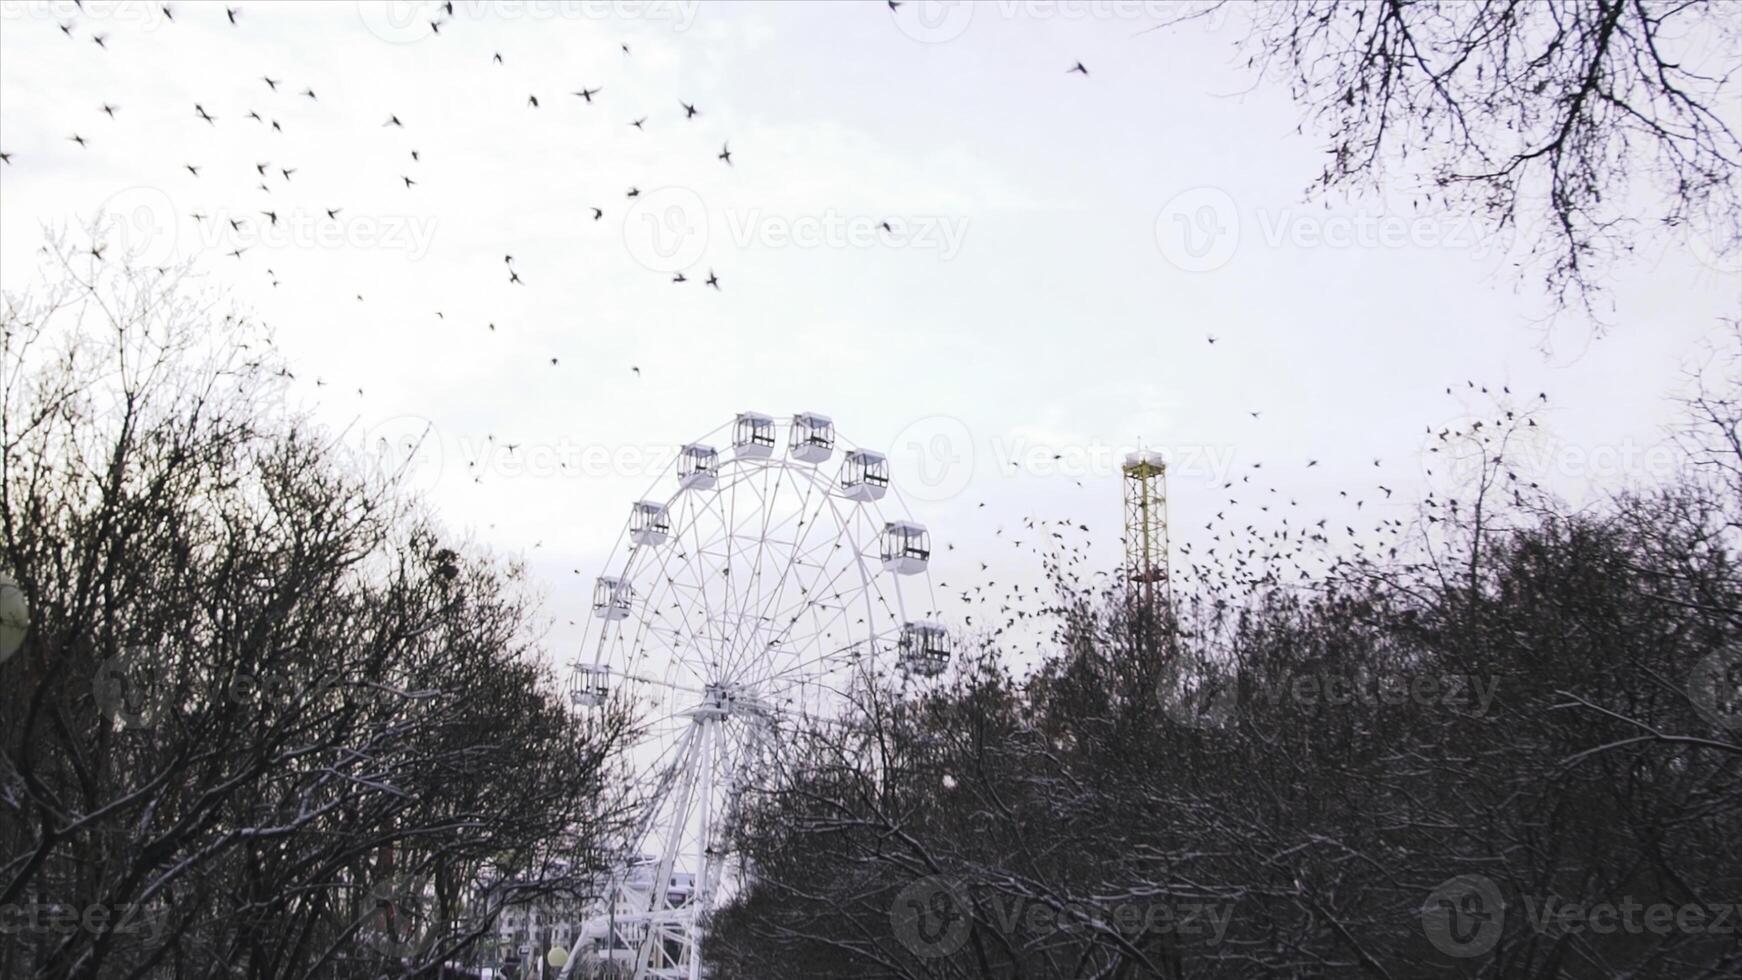 Motionless ferris wheel in the amusement park on grey sky background. Stock. Beautiful flock of birds flying away from the amusement park in autumn without people. photo